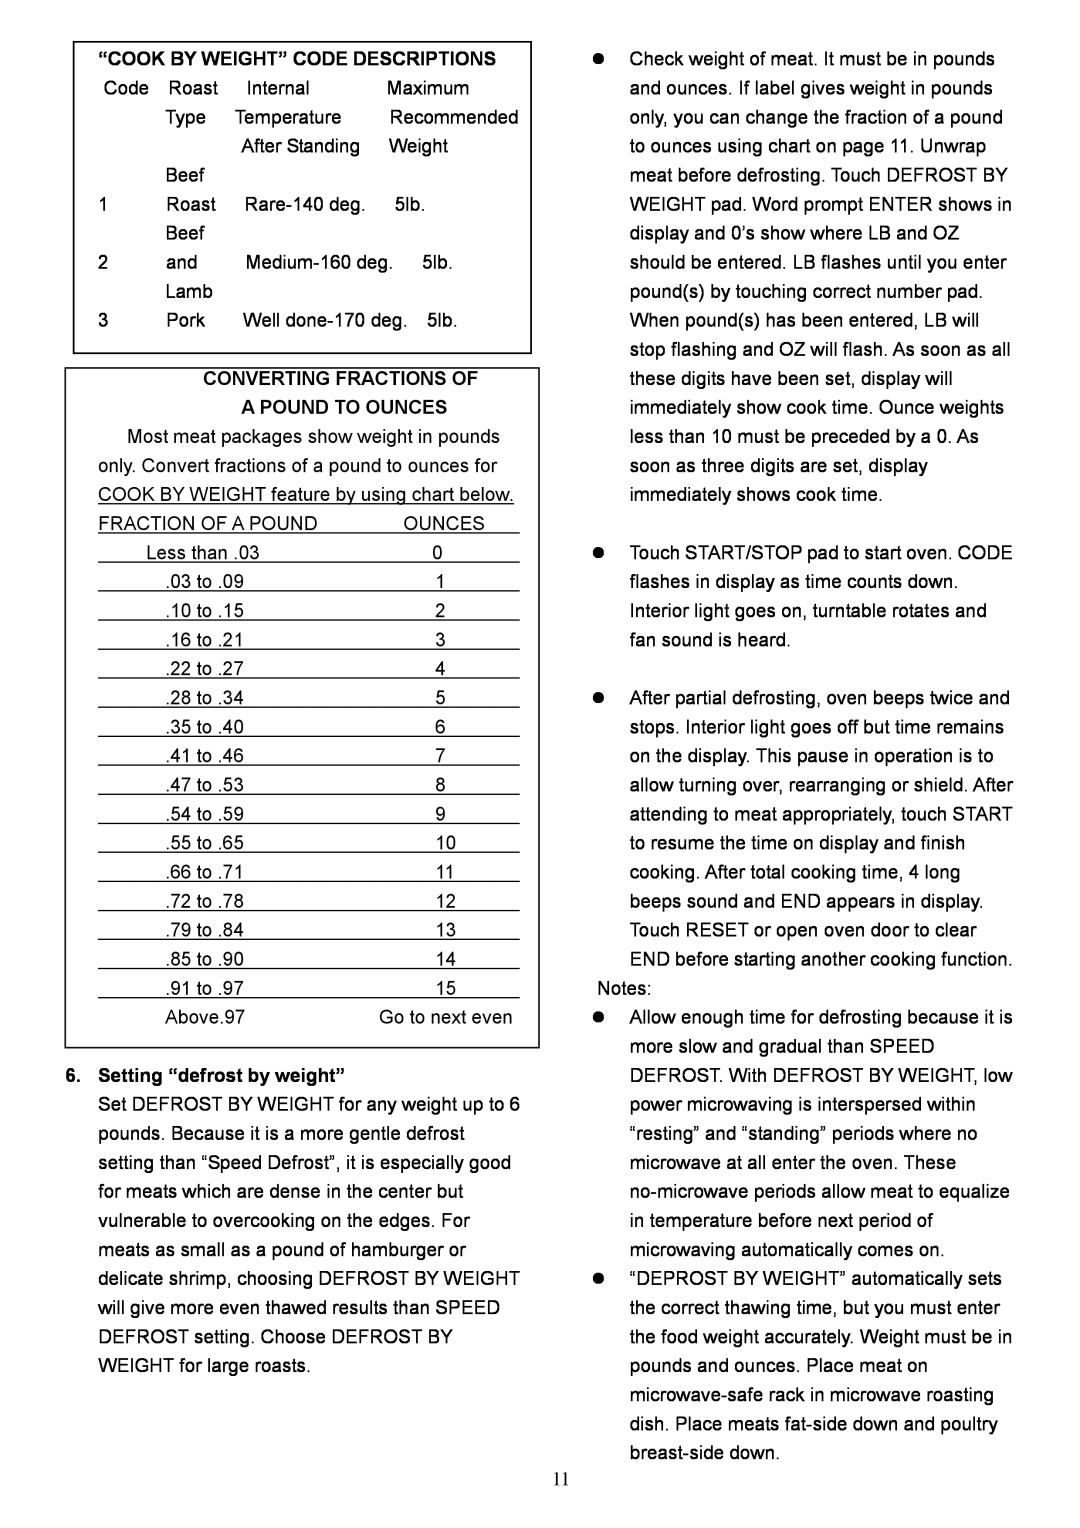 Danby DMW1148SS owner manual “Cook By Weight” Code Descriptions, Converting Fractions Of, Setting “defrost by weight” 